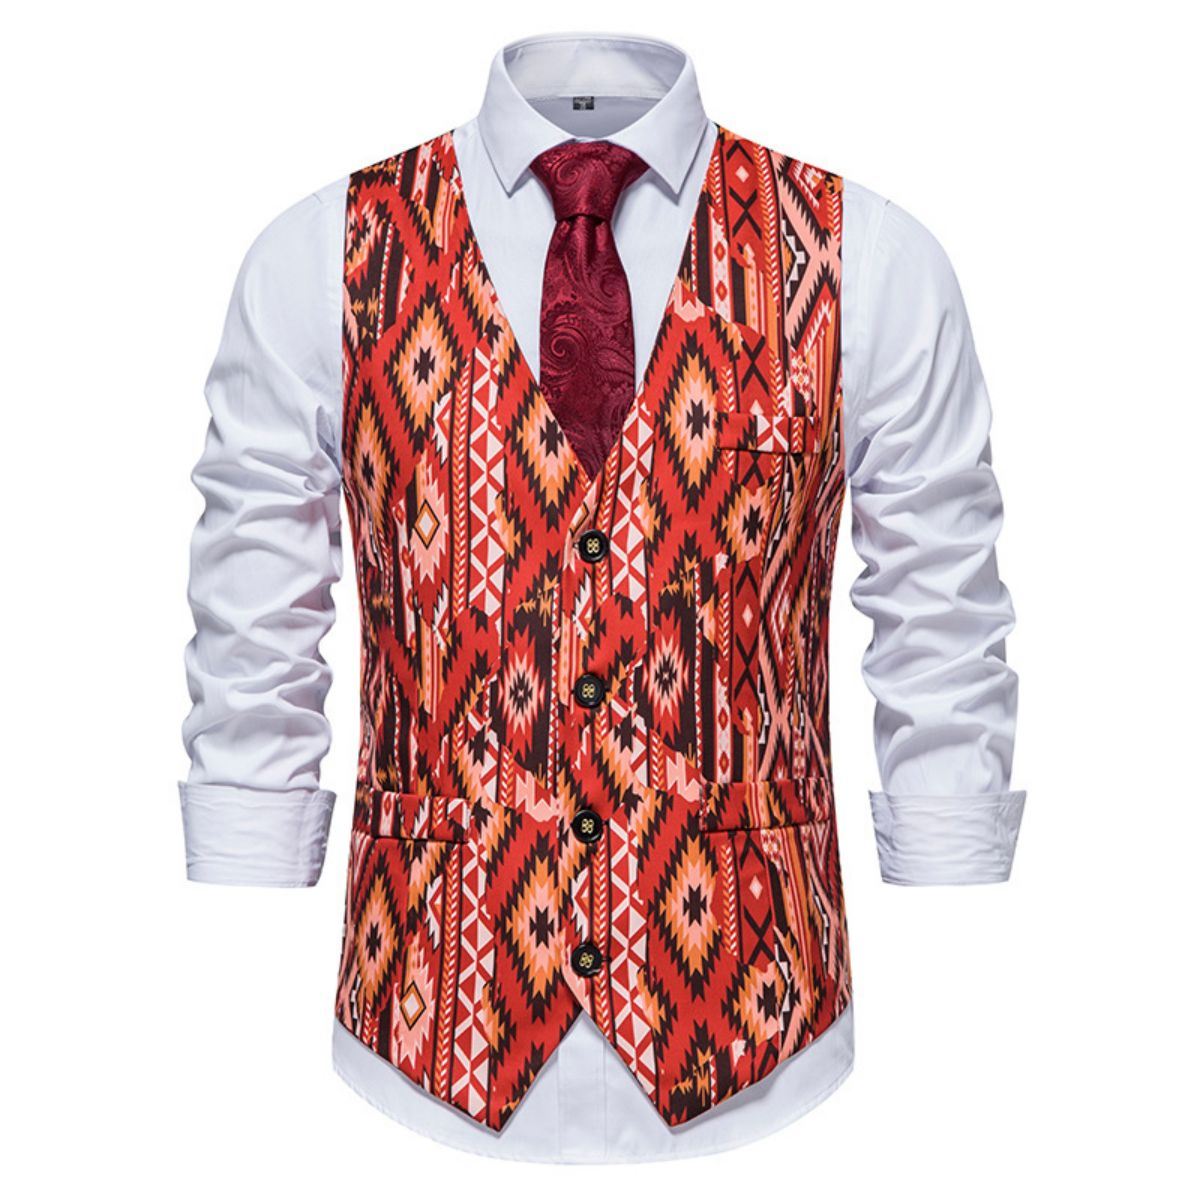 Men's Floral Print Suit Vest 4 Bottom V-neck Casual Waistcoat for Wedding Party Prom Dinner Performance